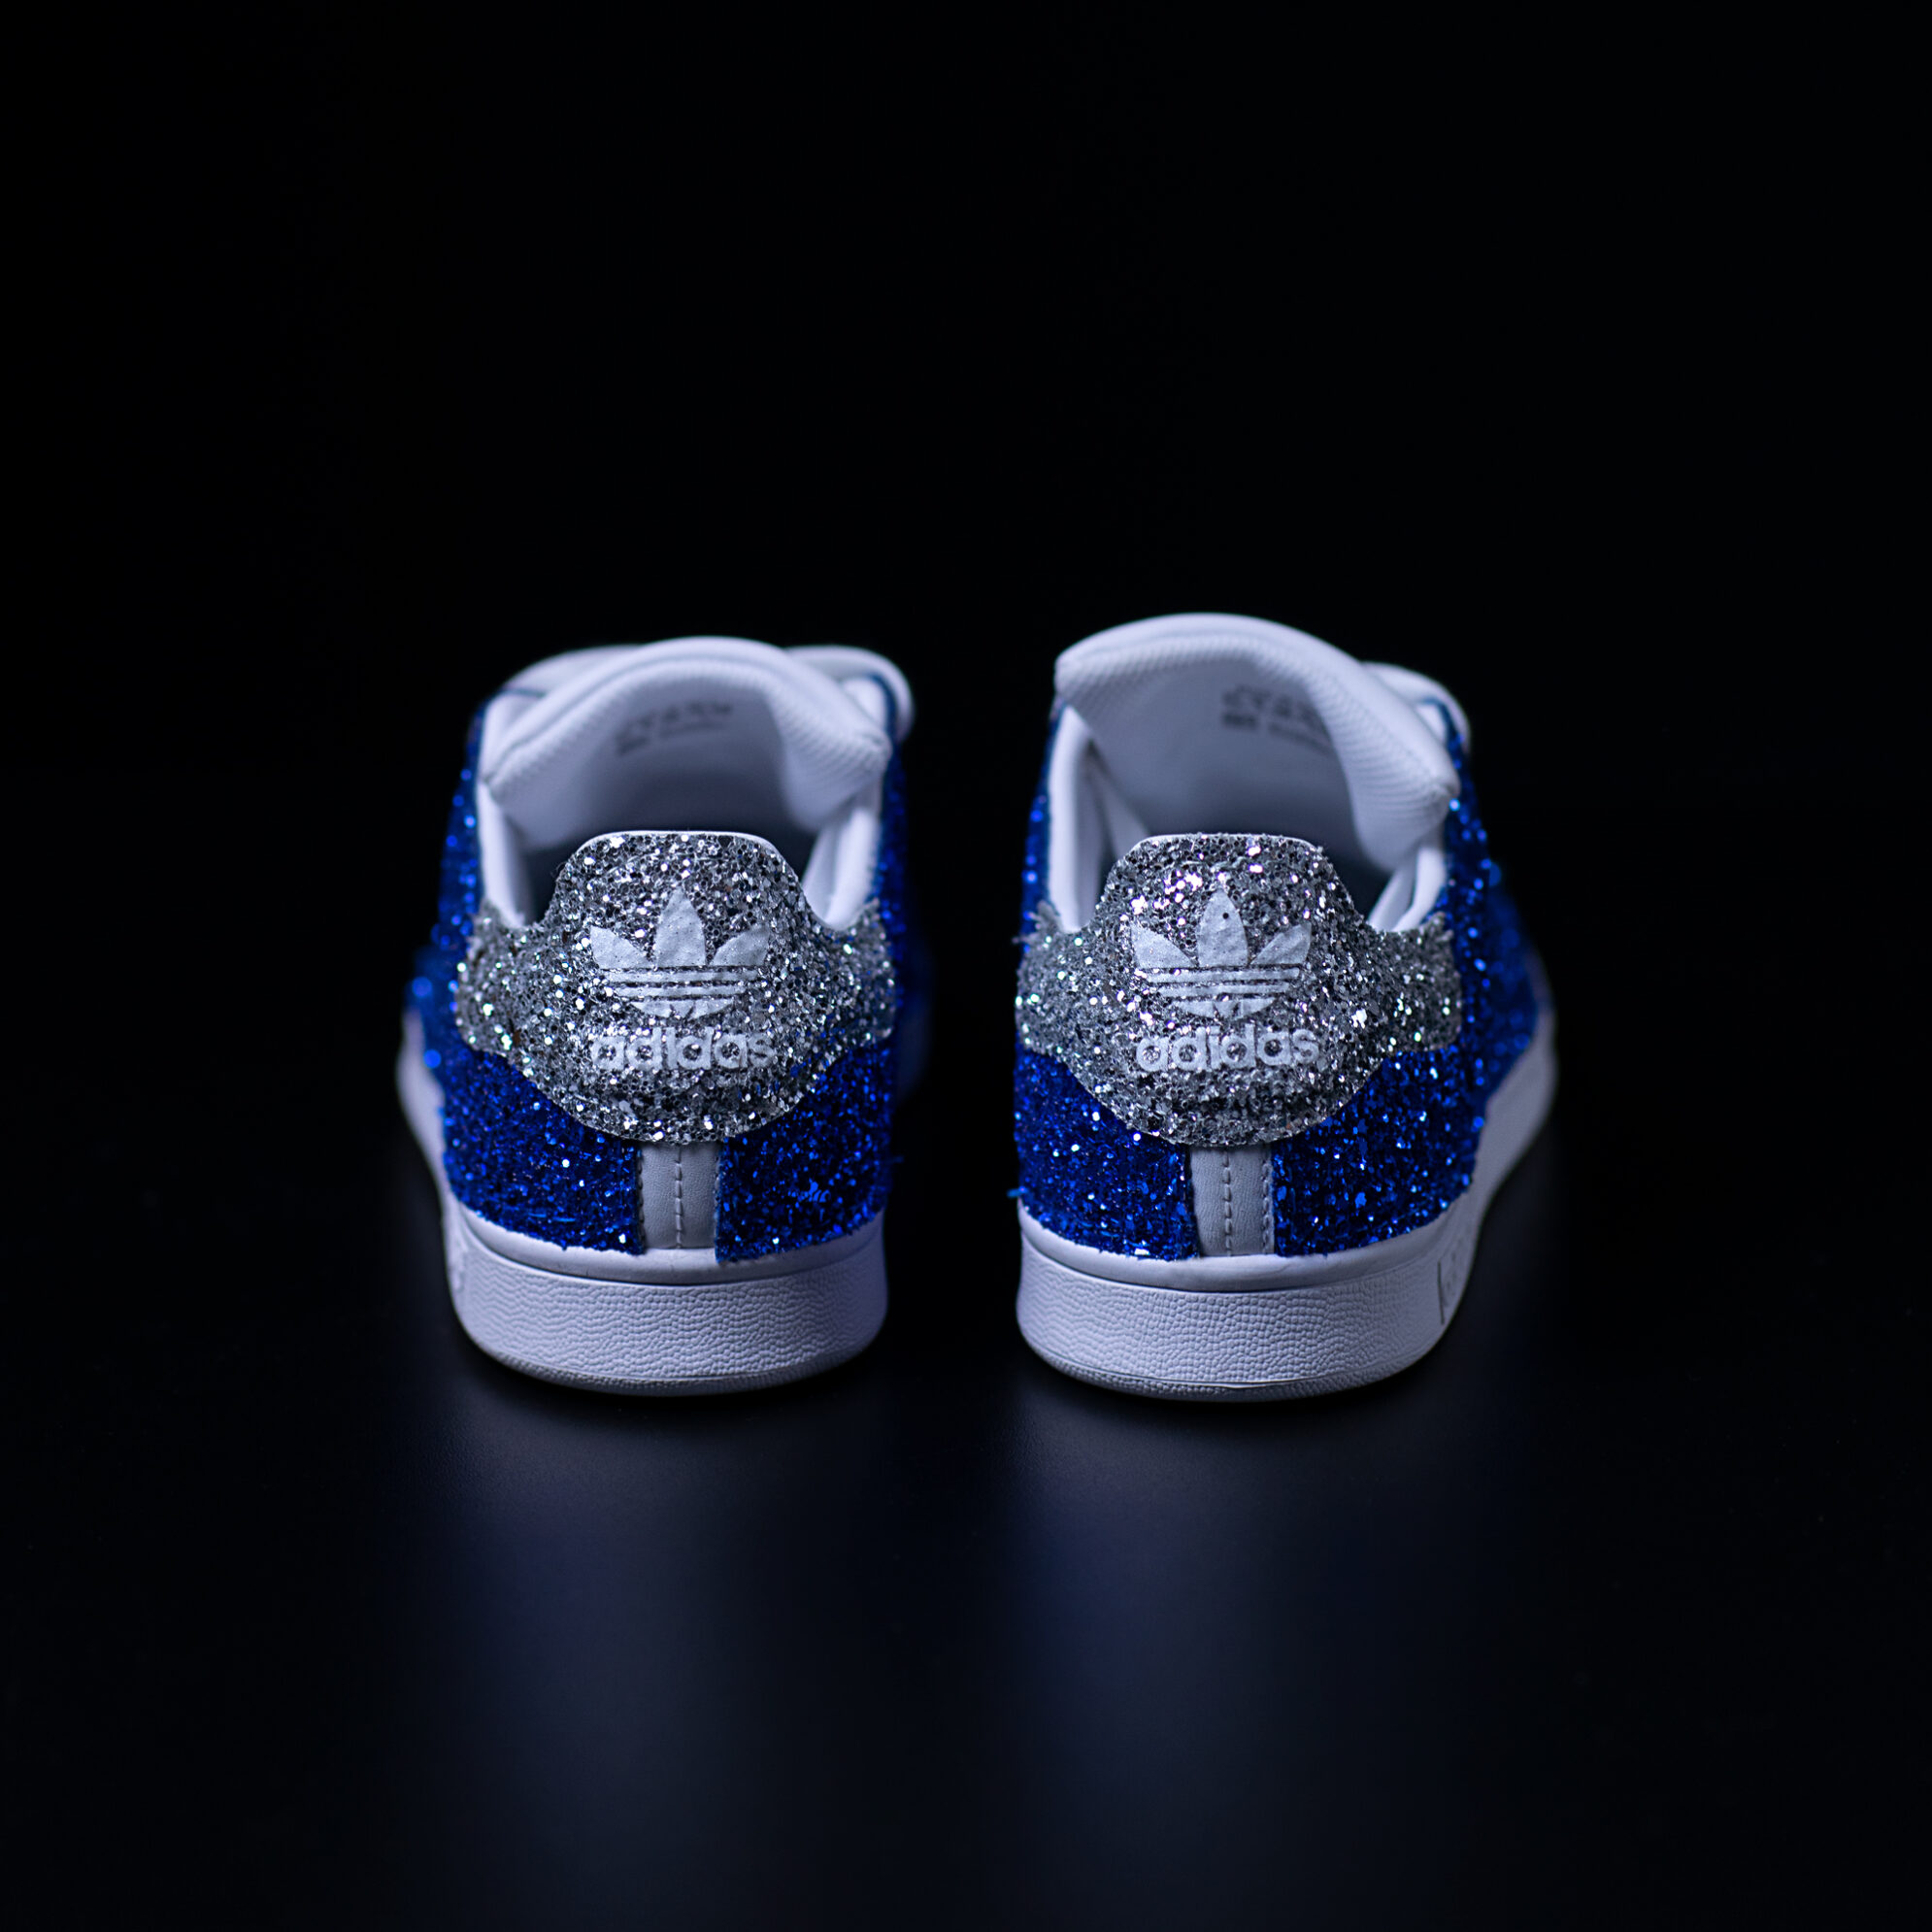 stan smith rise up adidas sneakers personalizzate da dressed